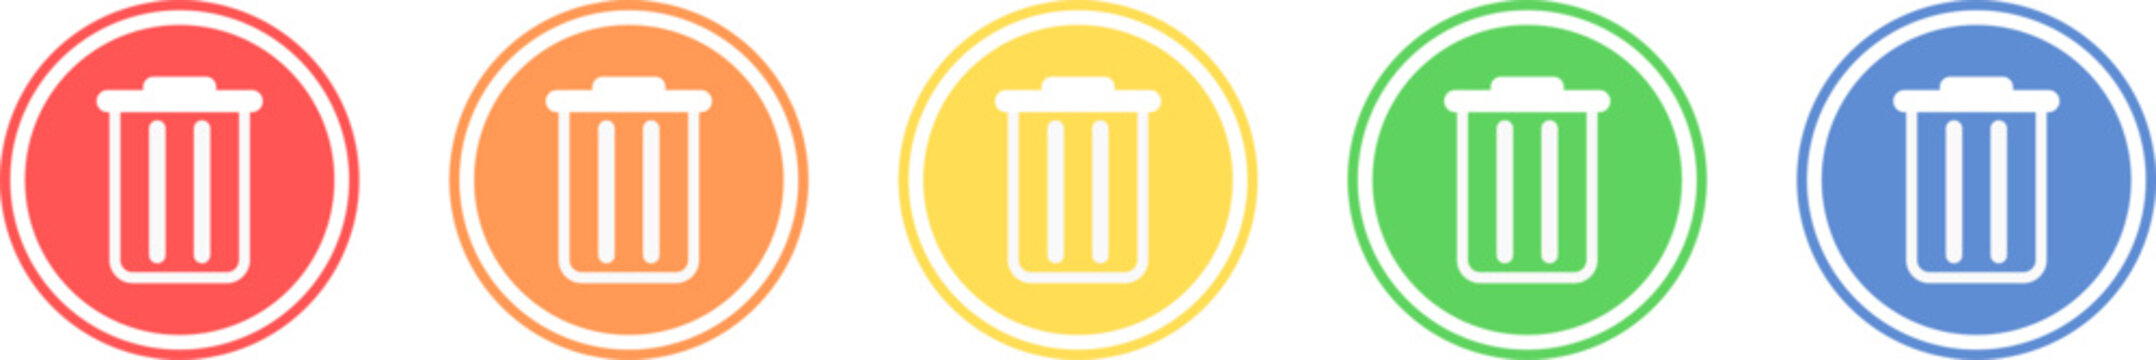 Trash can icon set. Delete icon in various colors.